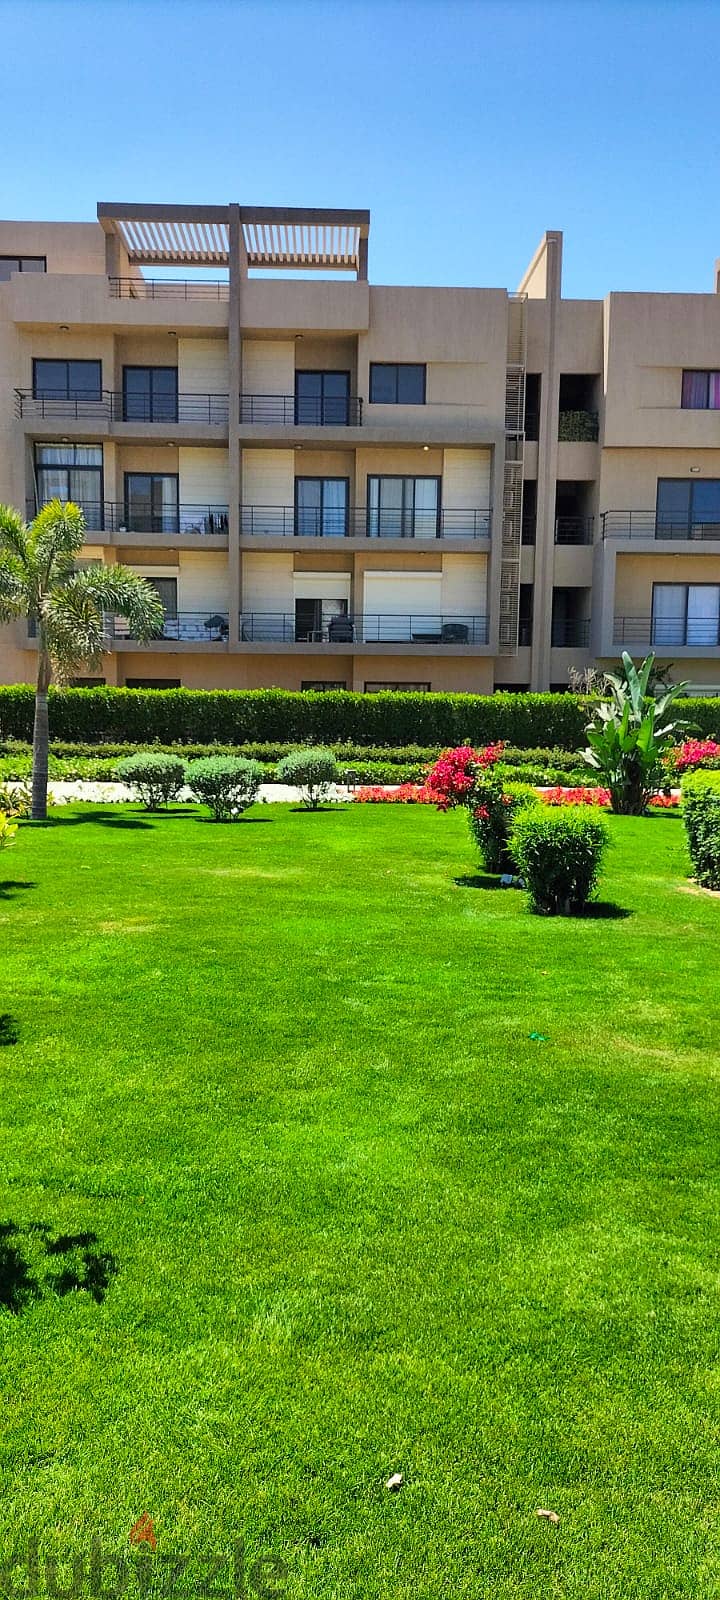 Apartment for sale with private garden, fully finished, with air conditioners and ready to move with an open view and landscape 4